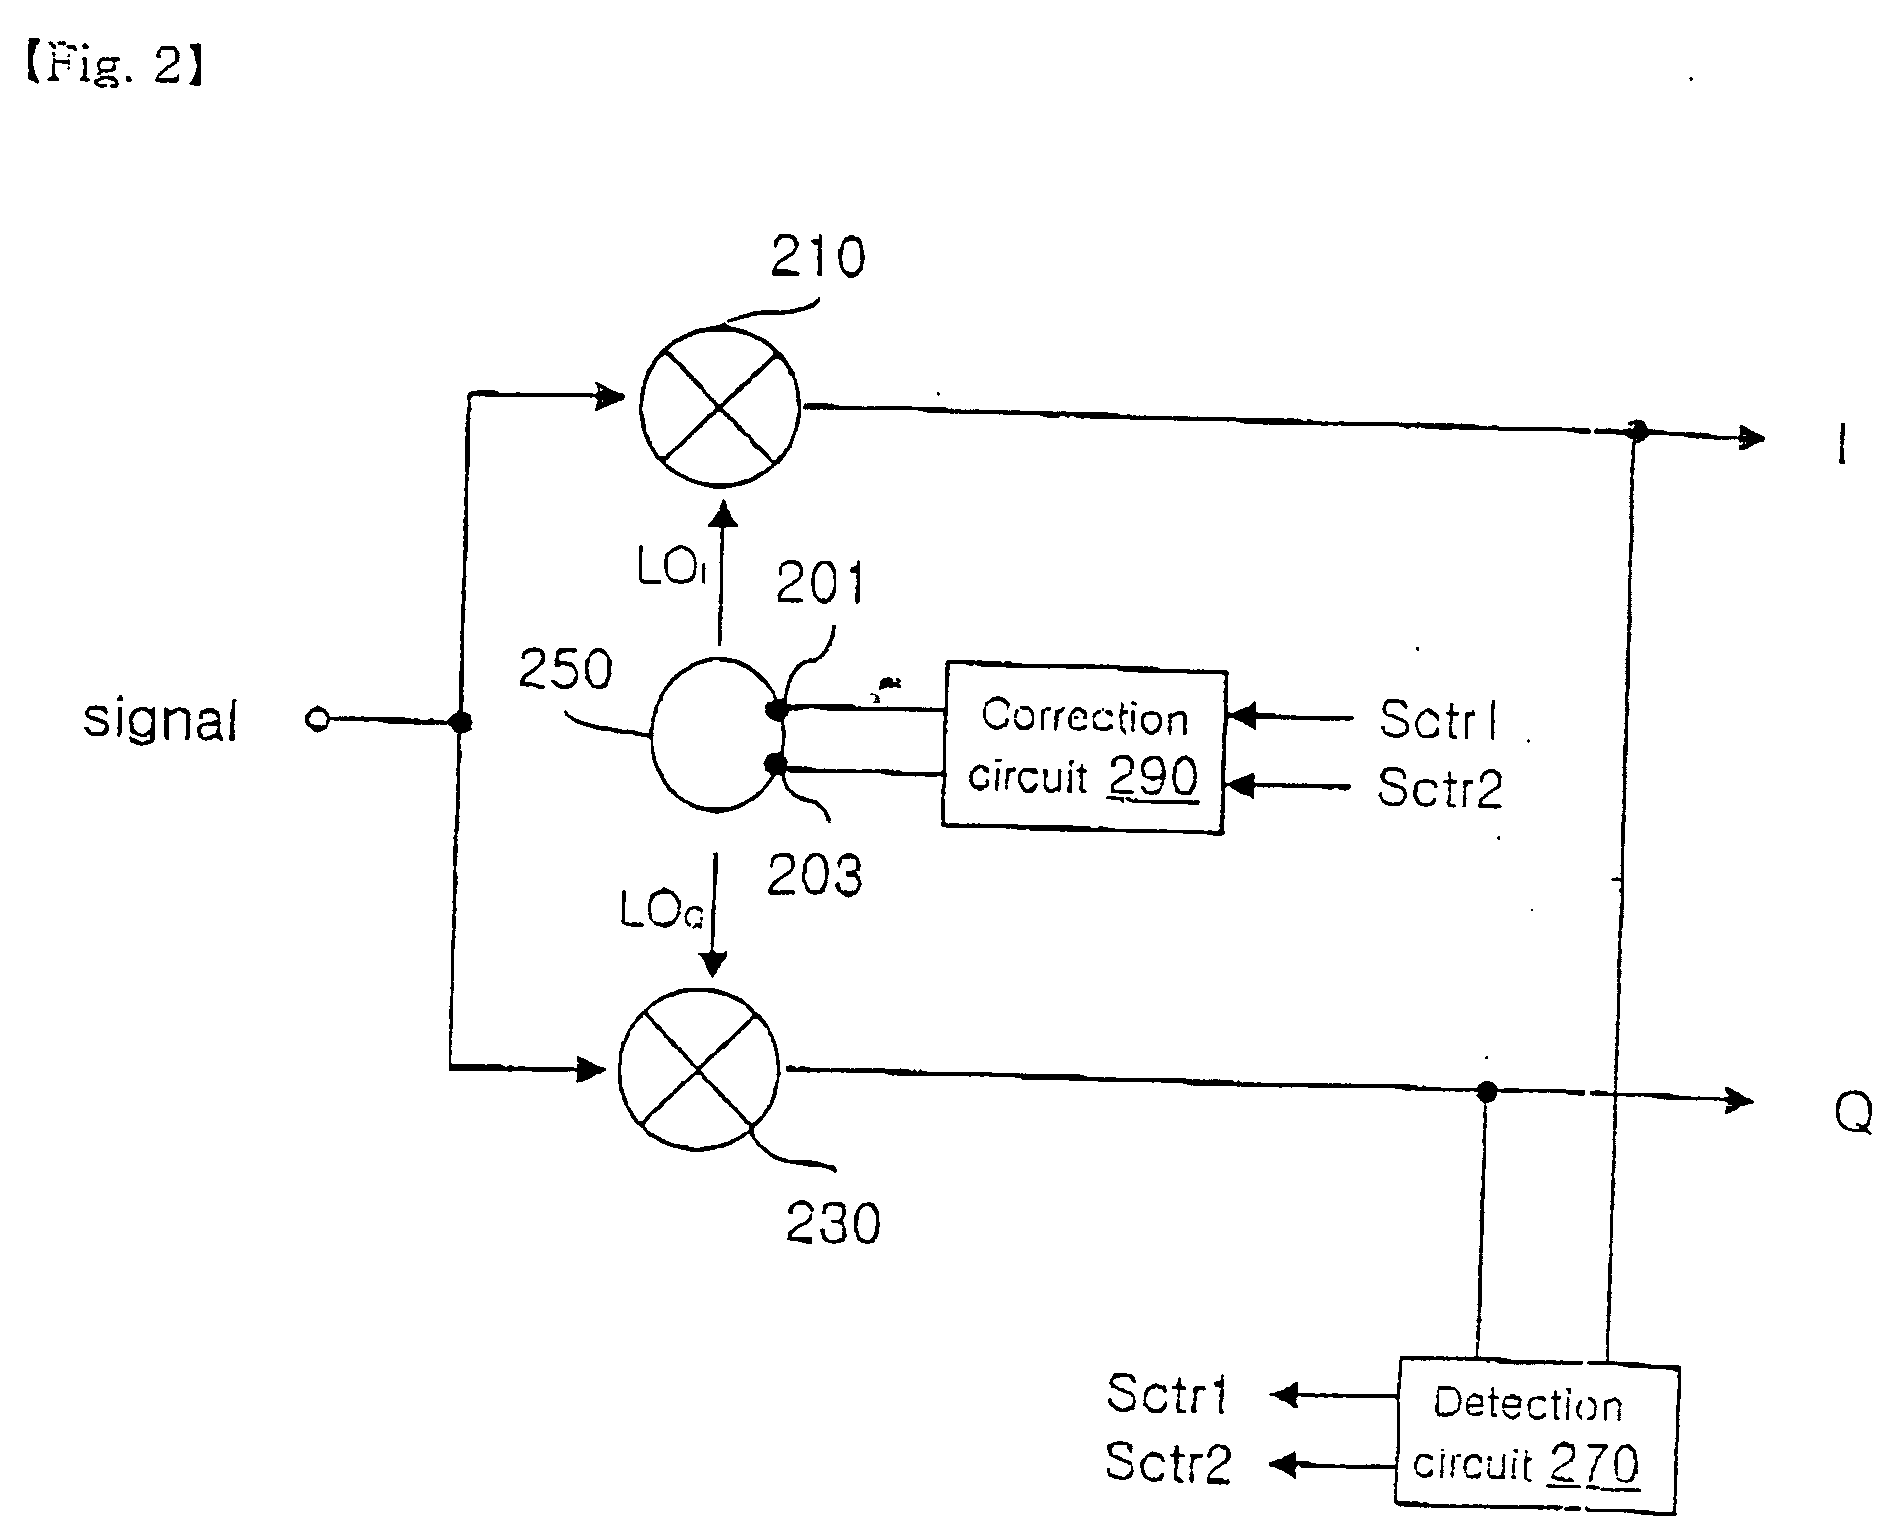 Local oscillator using I/Q mismatch compensating circuit through LO path receiver using thereof